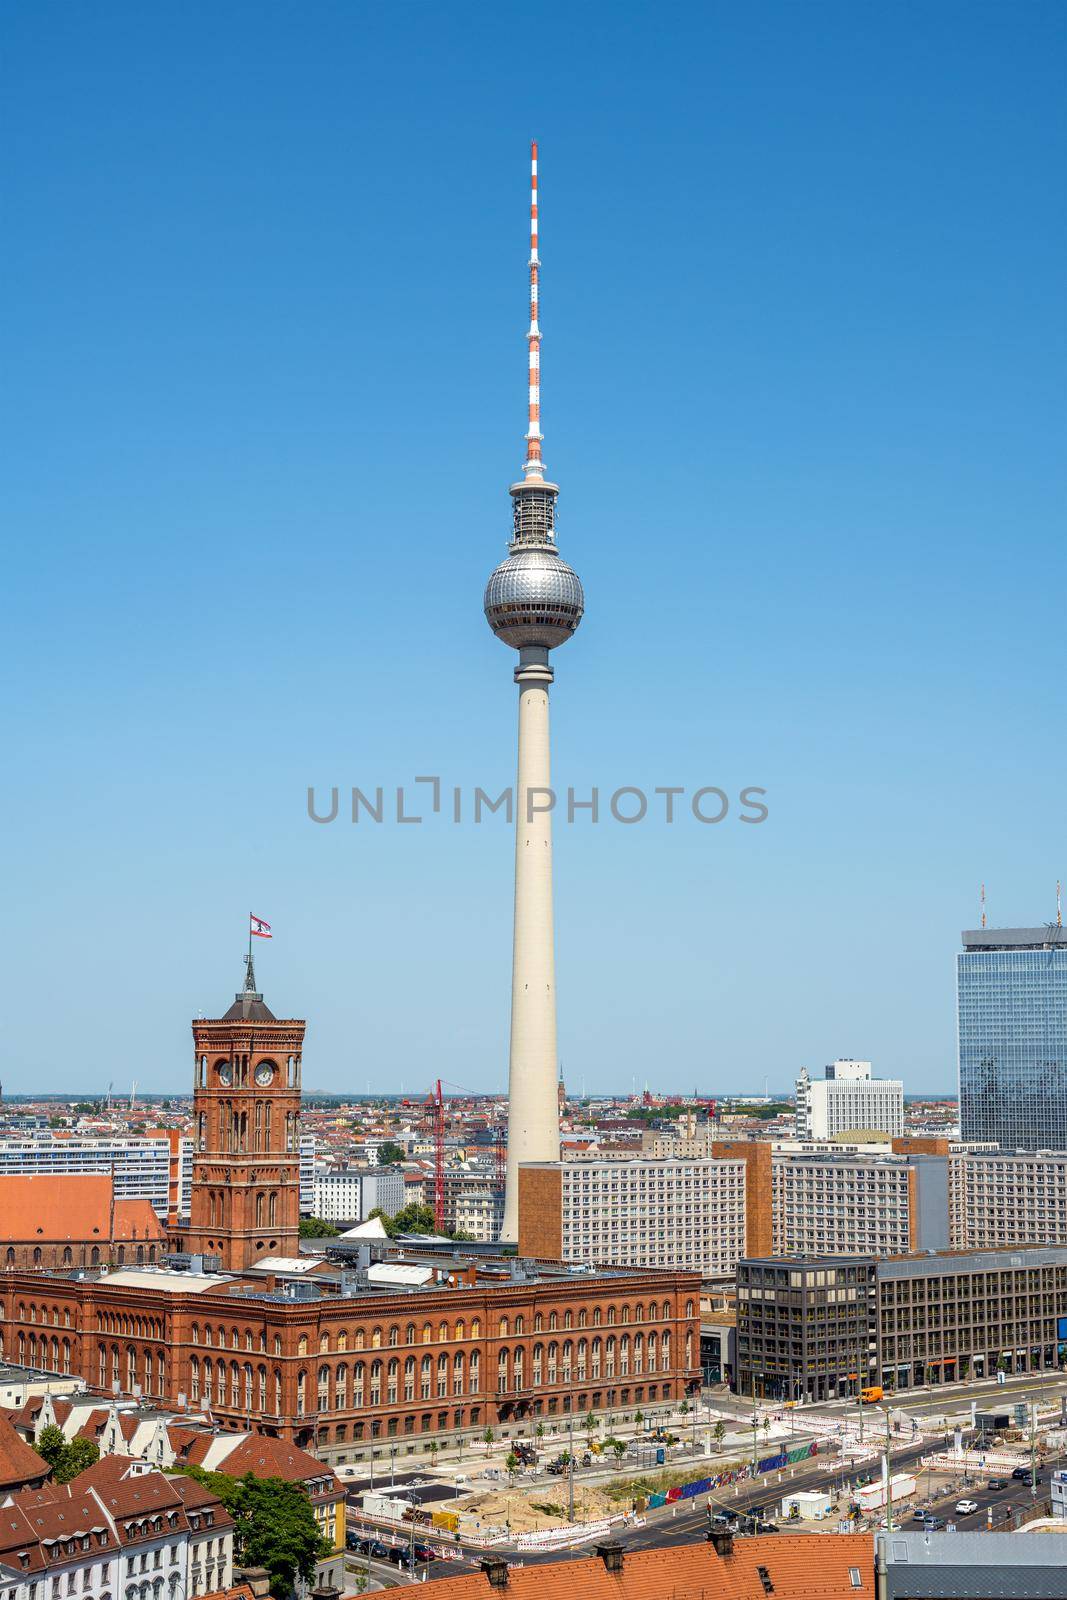 The famous TV Tower and the town hall of Berlin by elxeneize